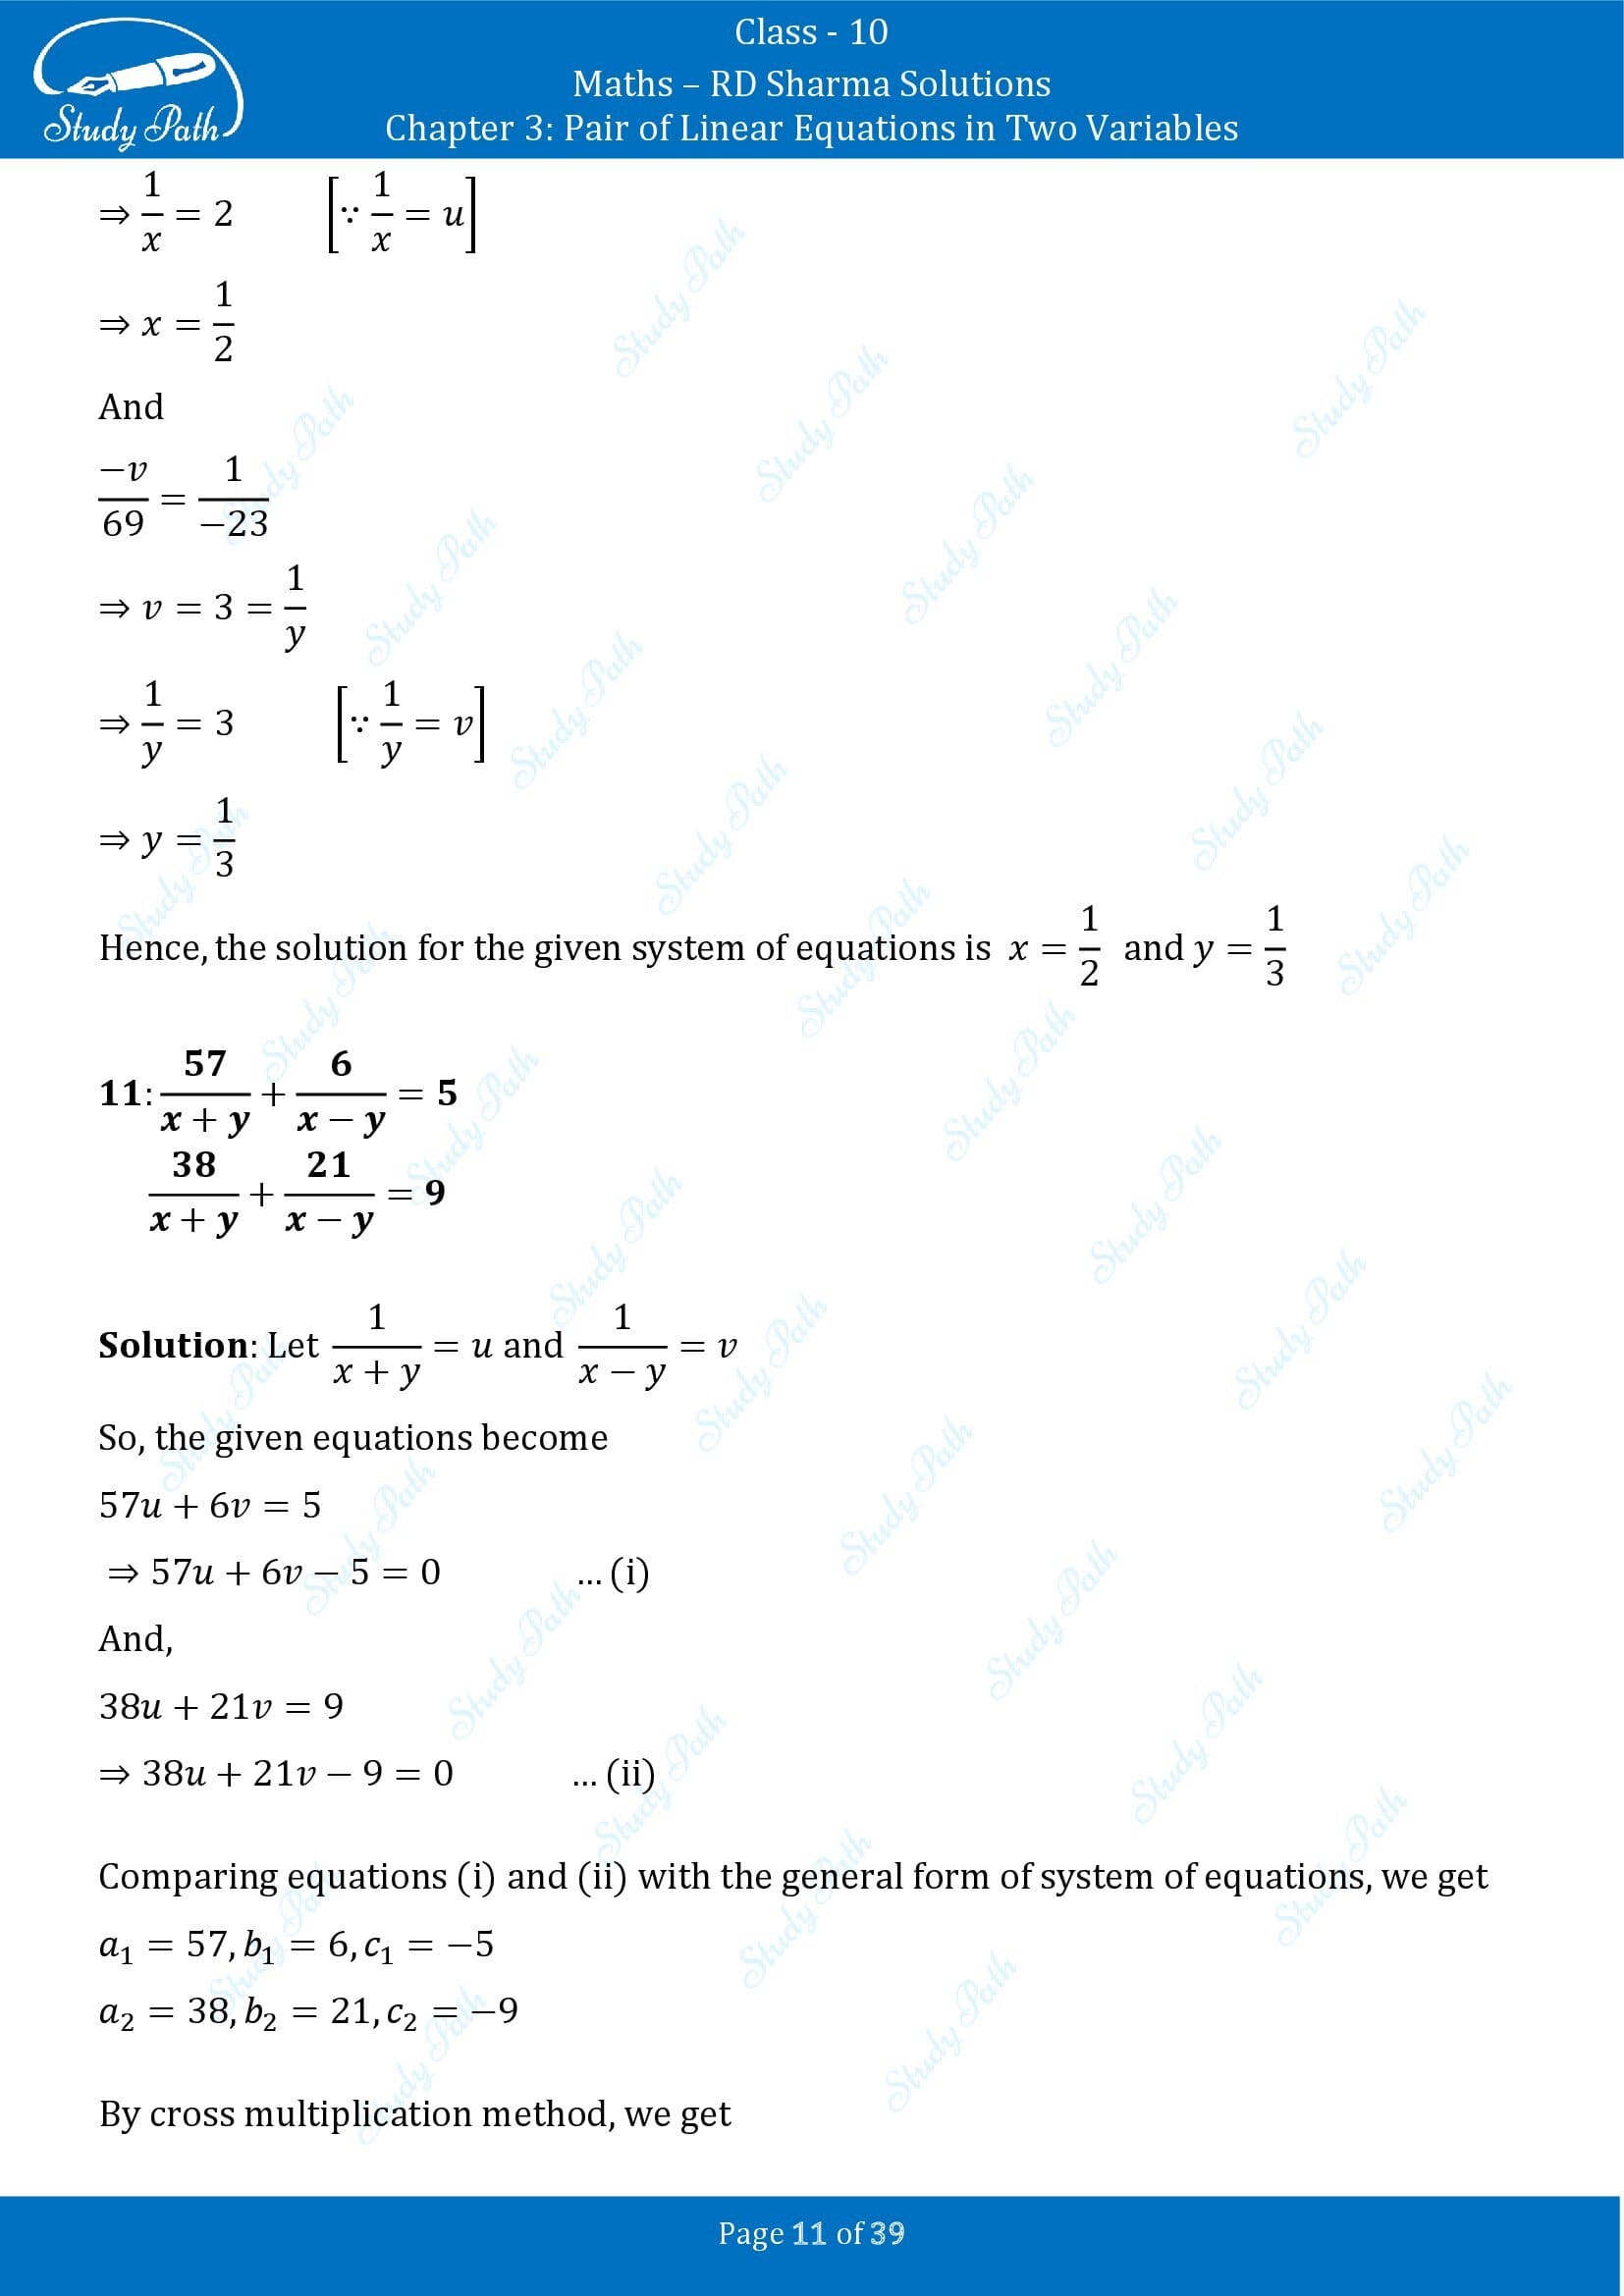 RD Sharma Solutions Class 10 Chapter 3 Pair of Linear Equations in Two Variables Exercise 3.4 00011